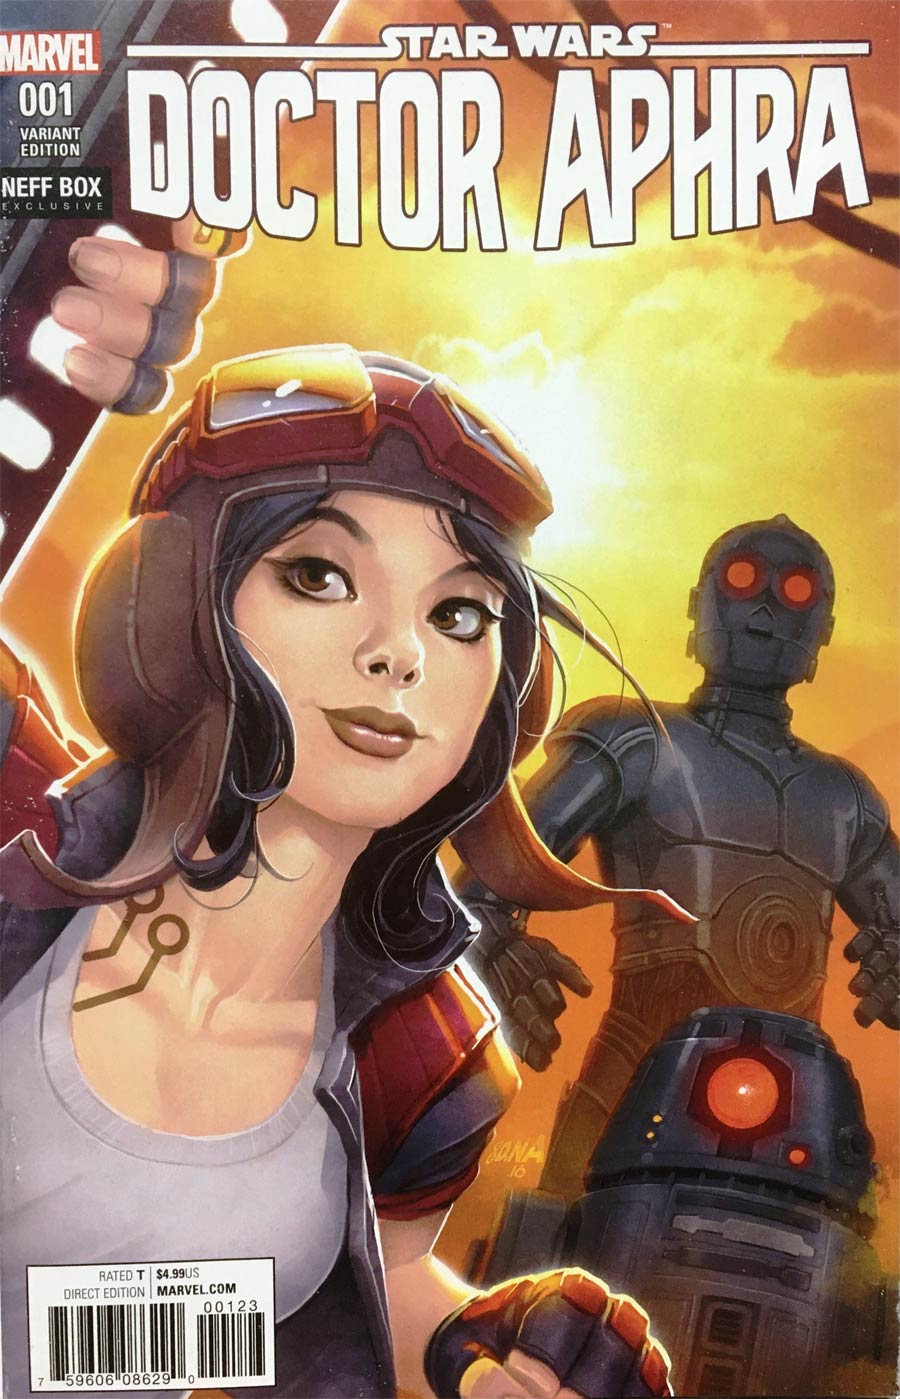 Star Wars Doctor Aphra #1 Cover I Neff Box Exclusive Variant Cover